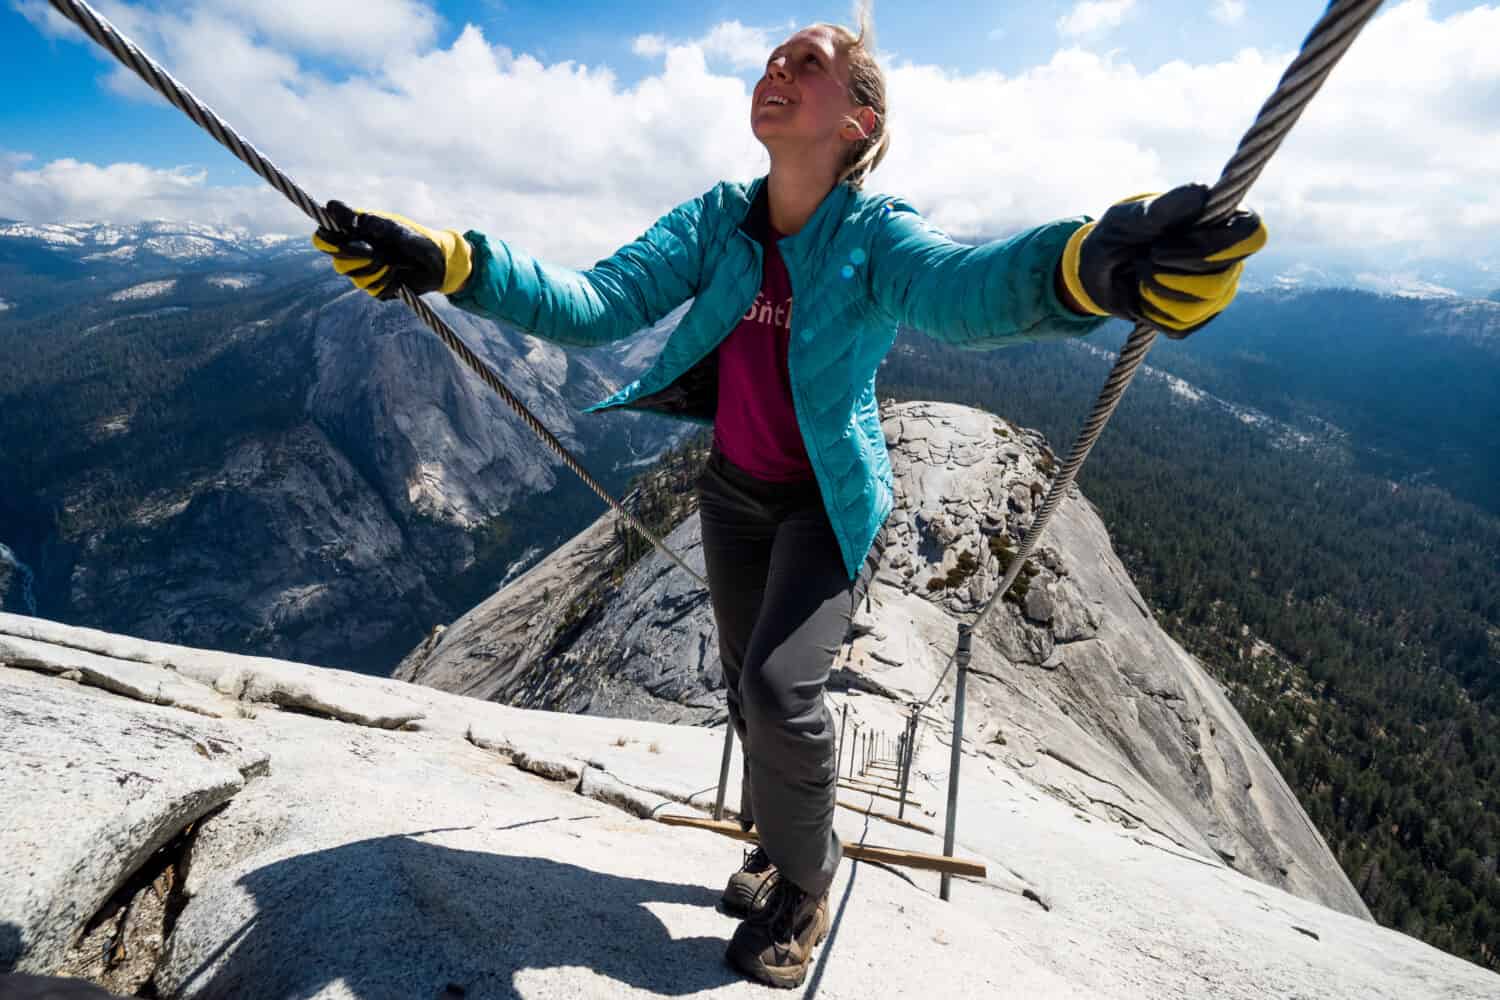 Climbing up the famous cables to the top of Half Dome.